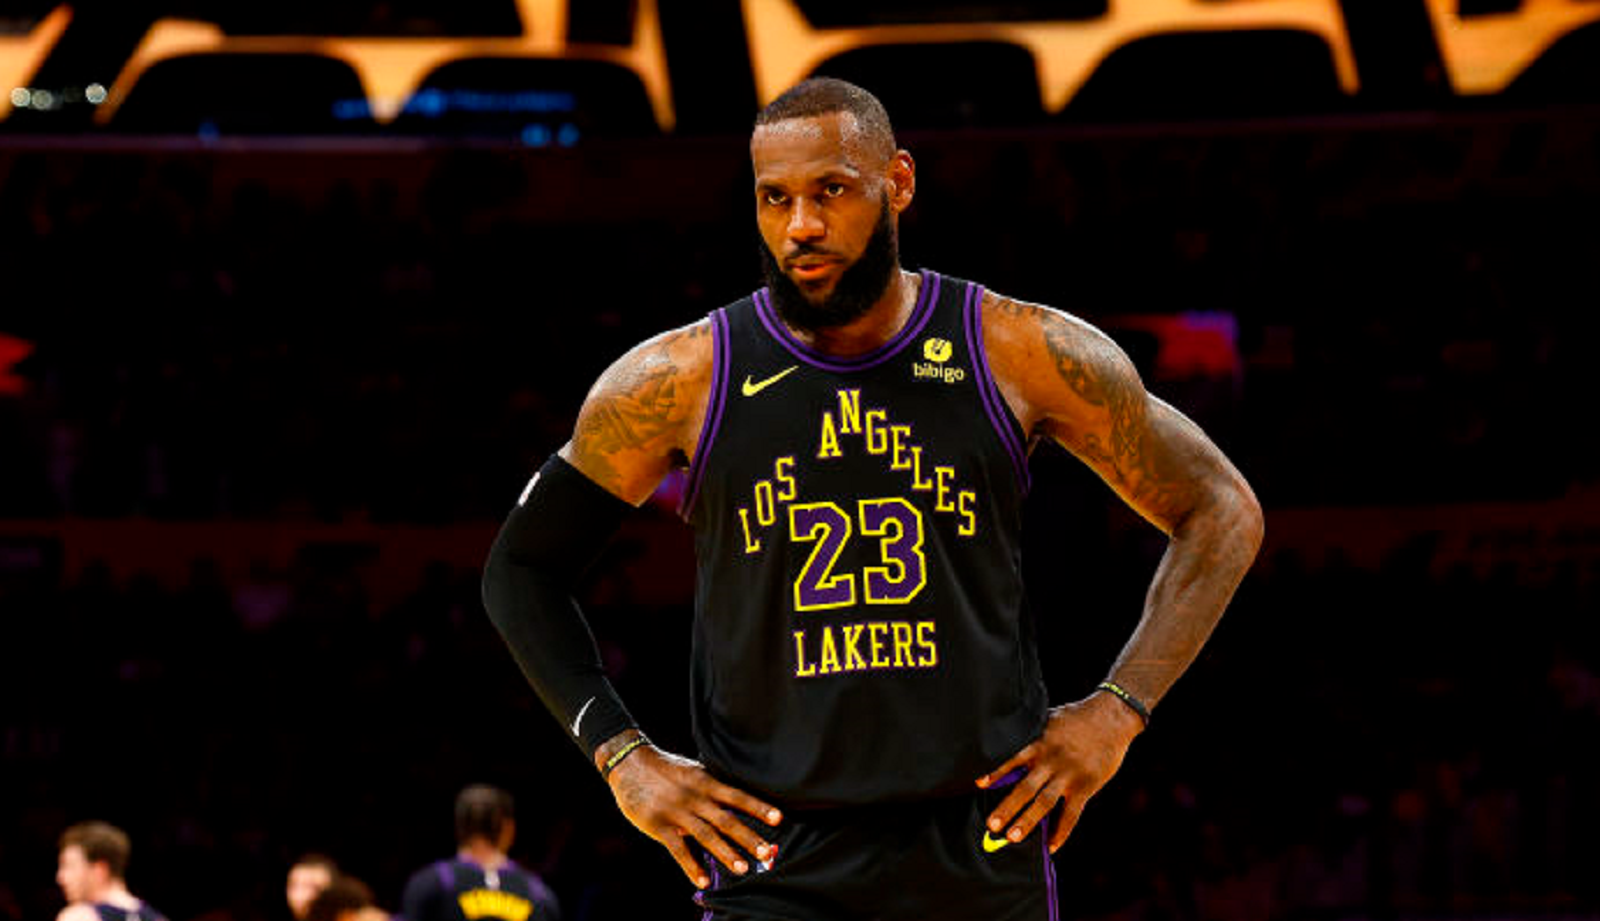 Fans Accuse The NBA Of Rigging In-Season Tournament For LeBron James And The Lakers After Bizarre Timeout Call By Refs